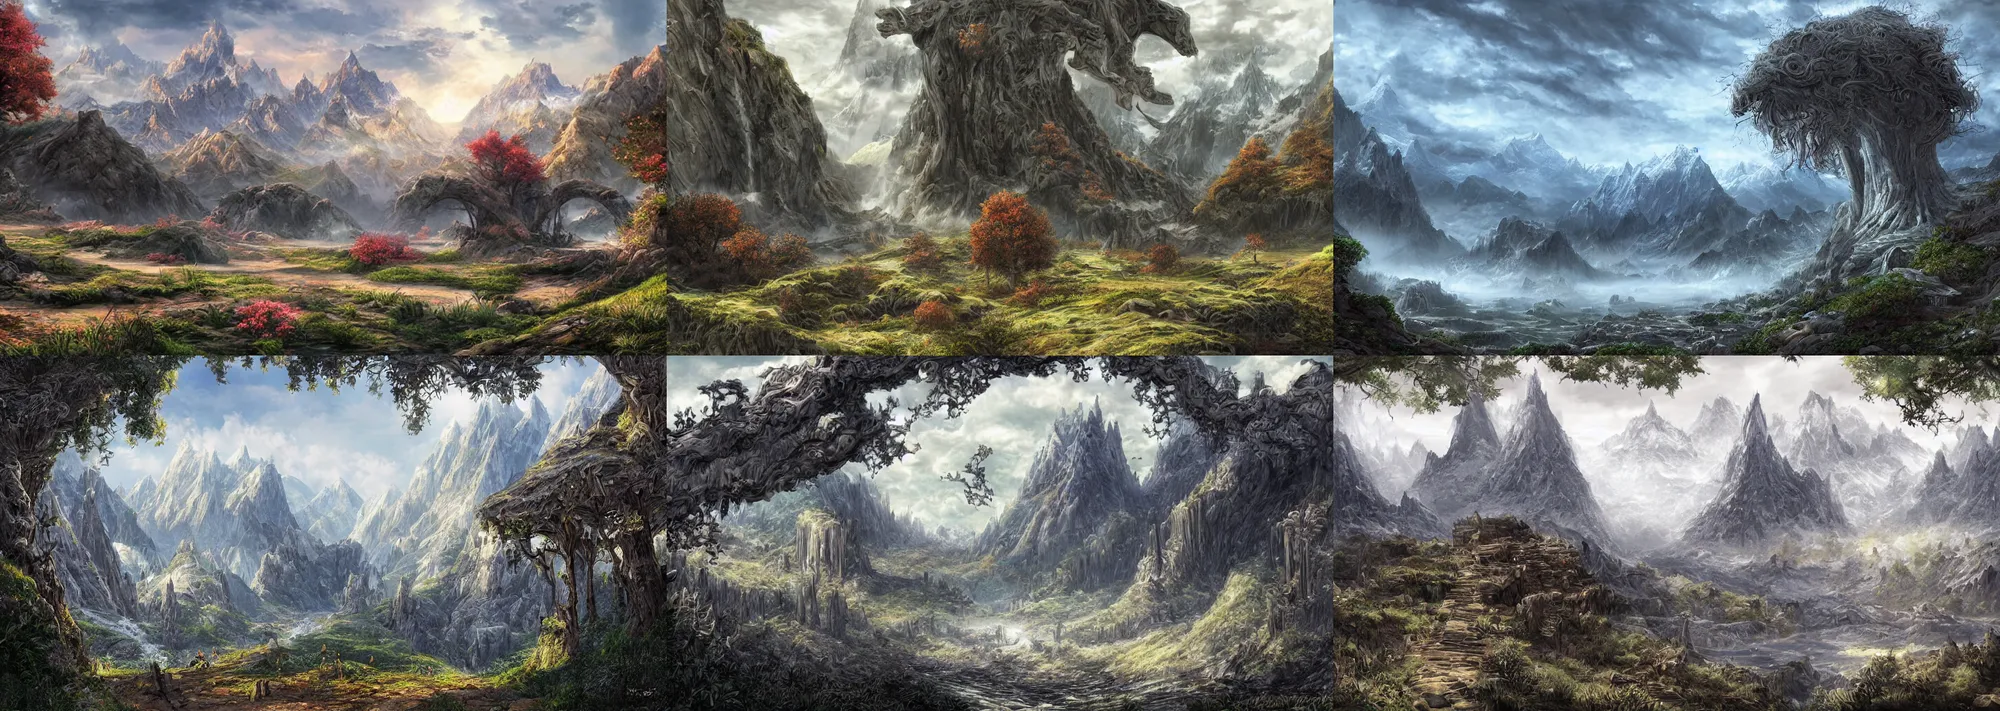 Prompt: A beautiful fantasy landscape with mountains and trees everywhere, hyper-detailed digital art by kentaro miura